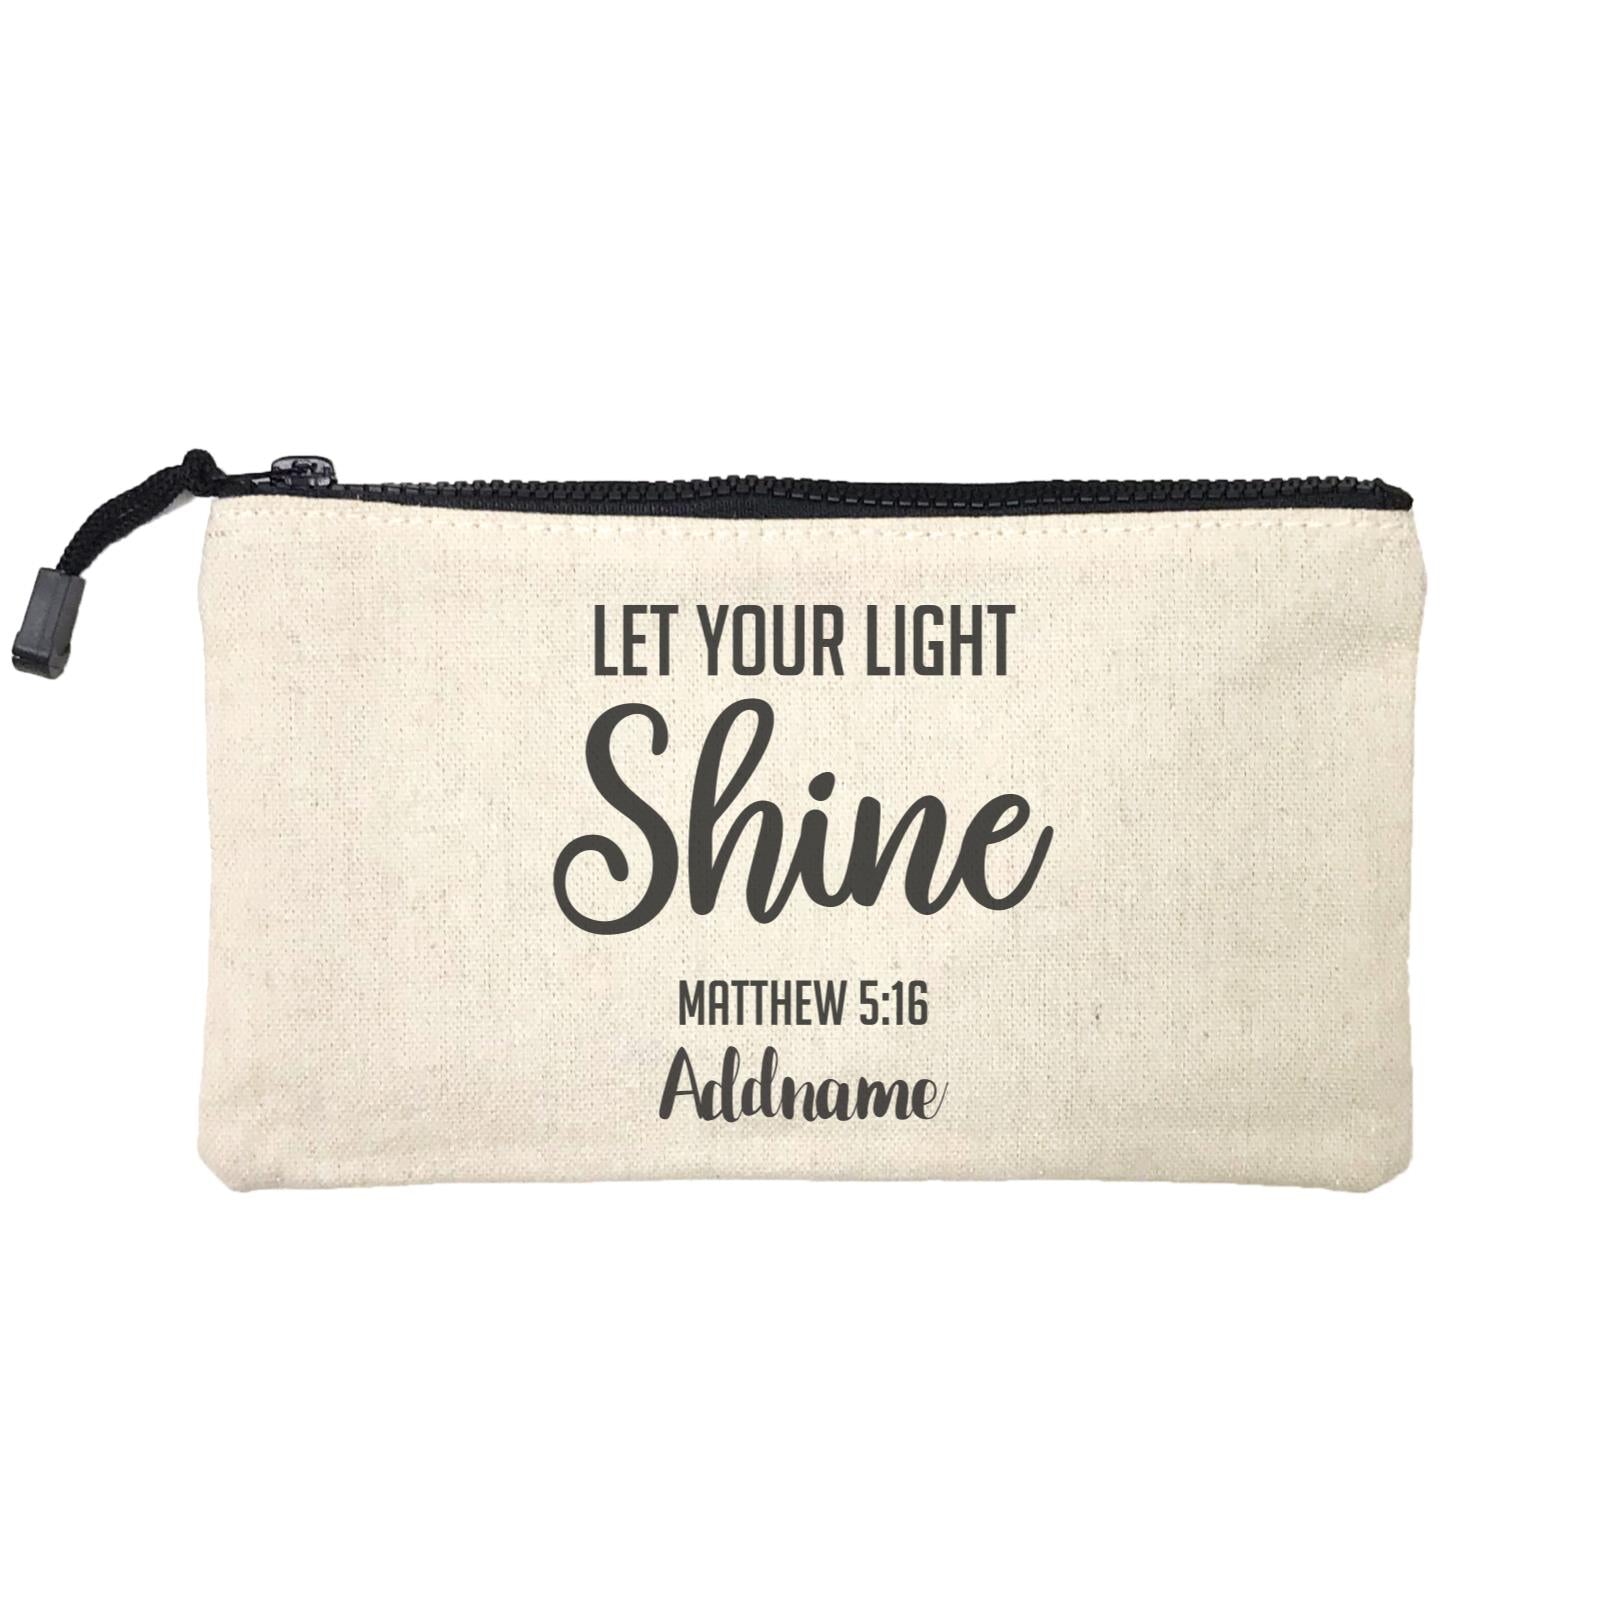 Christian Series Let Your Light Shine Matthew 5.16 Addname Mini Accessories Stationery Pouch